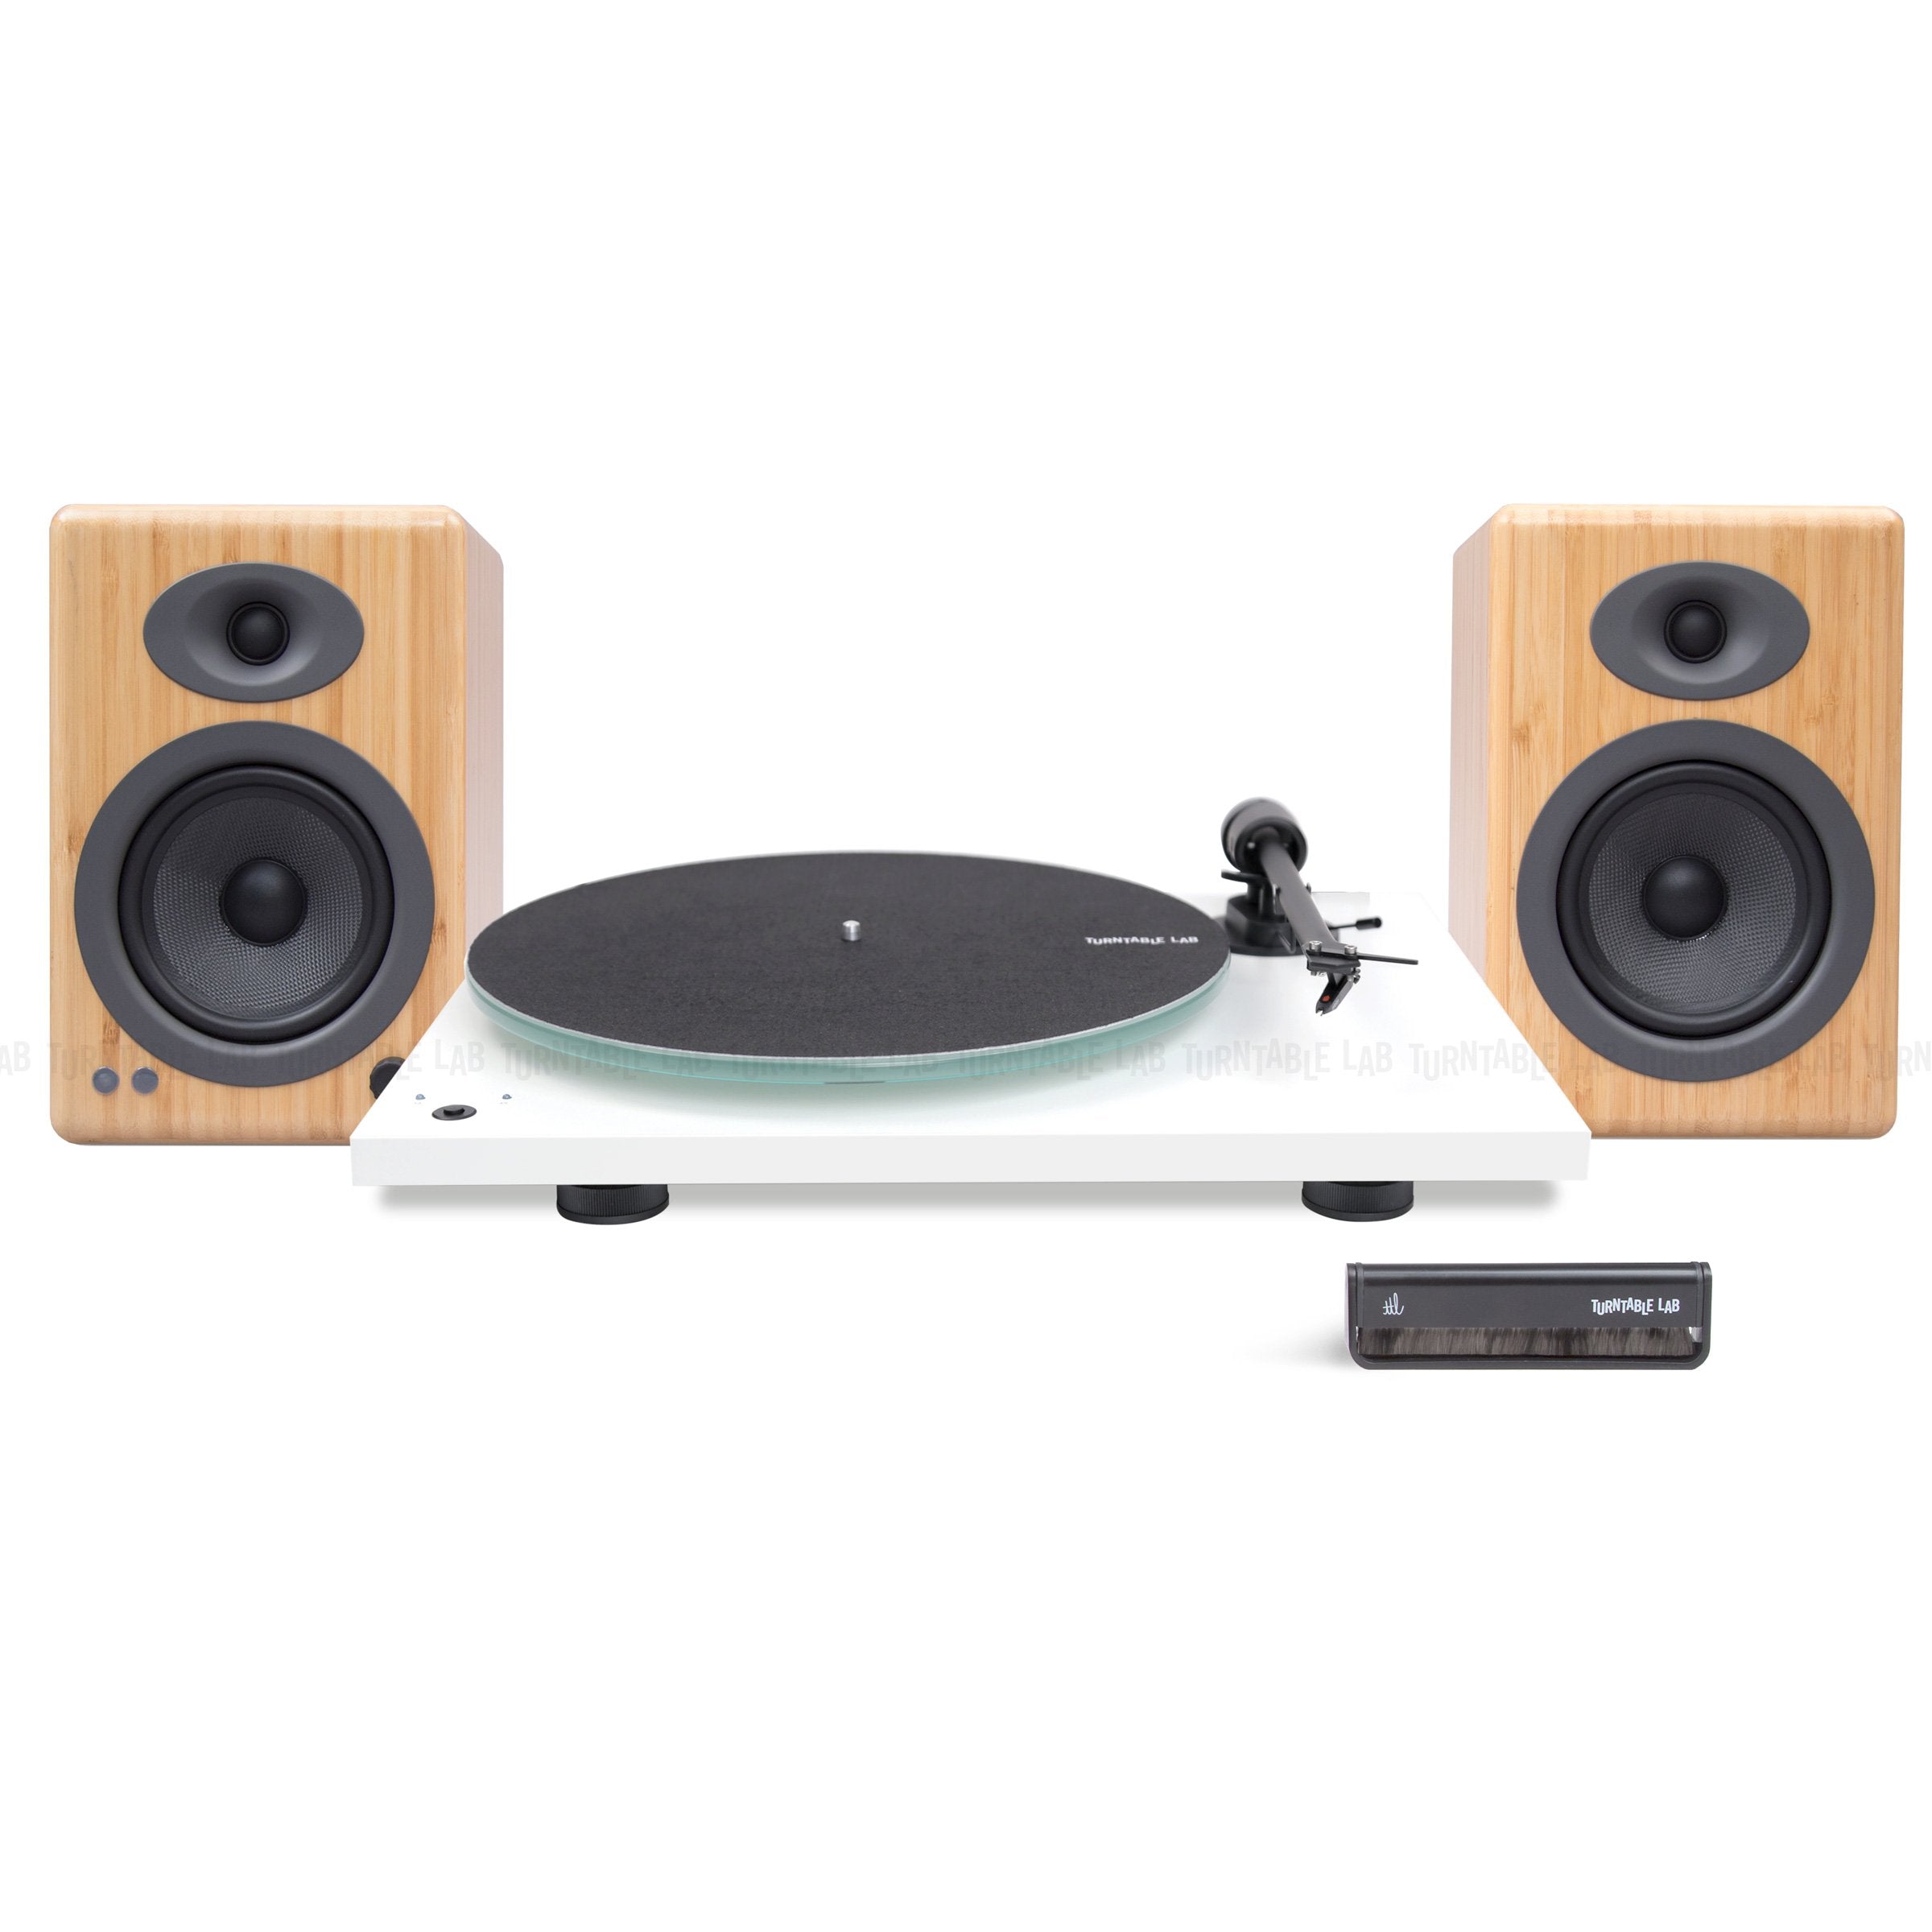 Pro-Ject: T1 Phono SB / Audioengine A5+W / Turntable Package